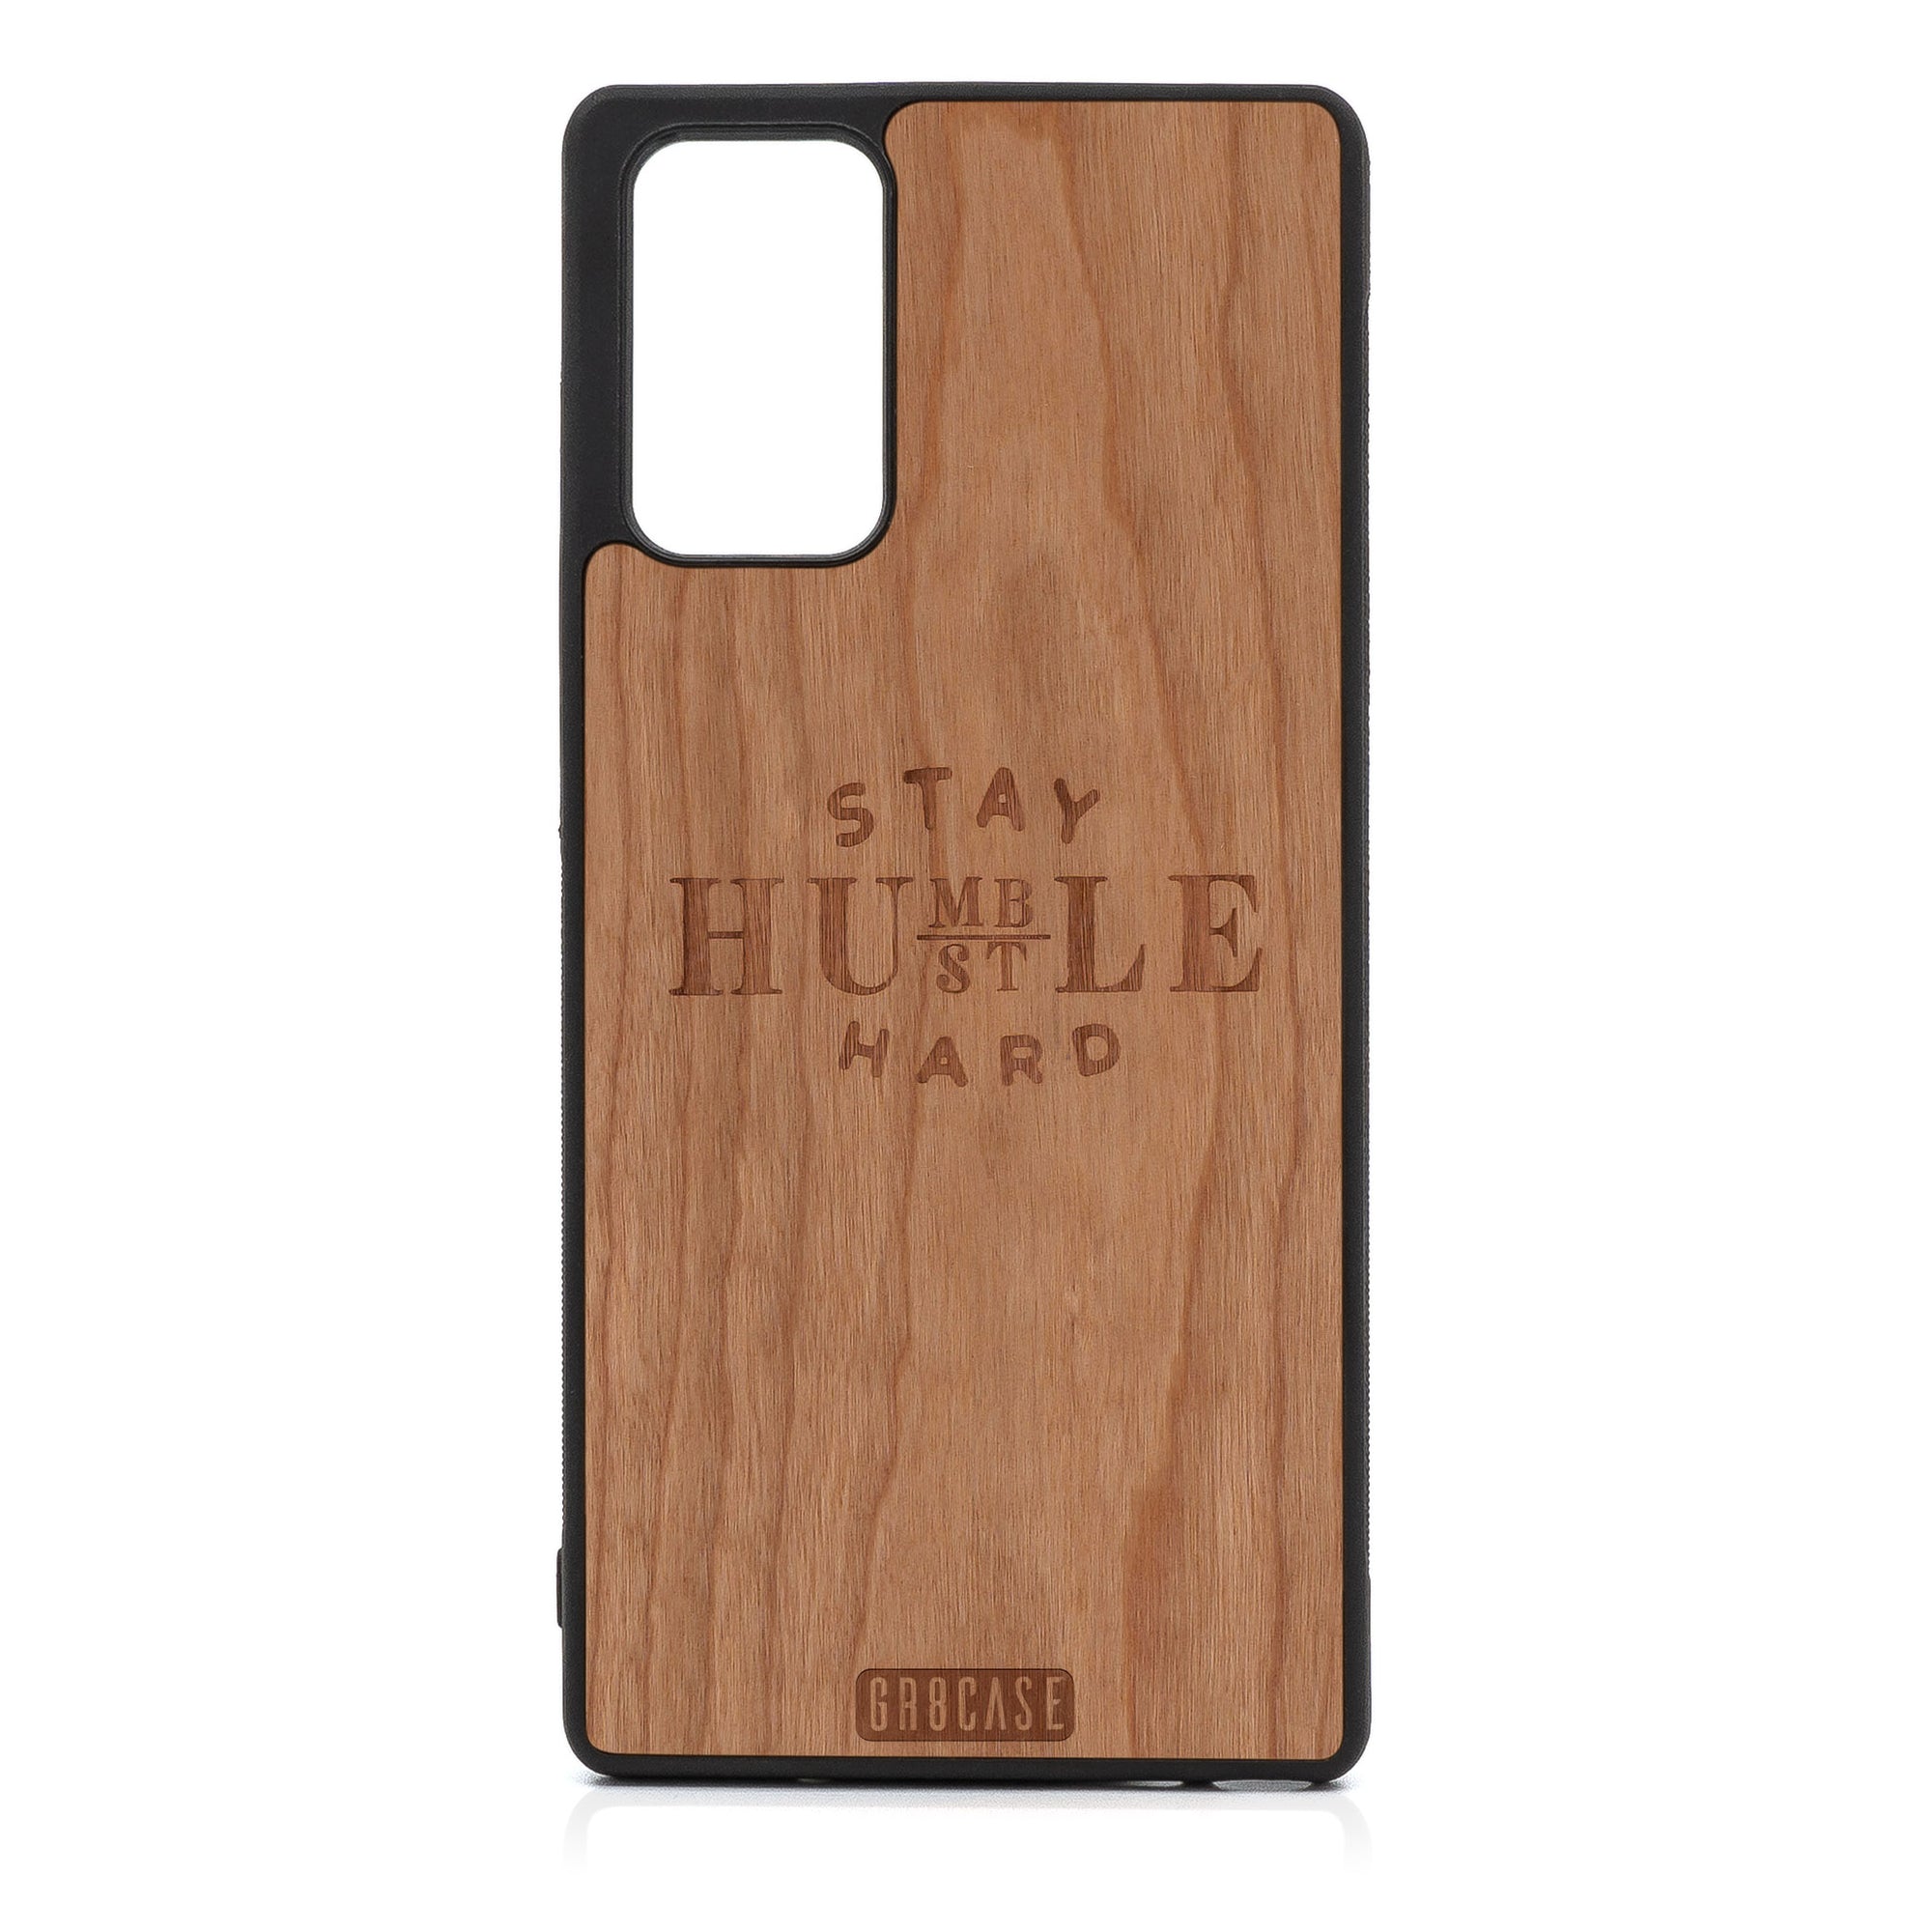 Stay Humble Hustle Hard Design Wood Case For Samsung Galaxy Note 20